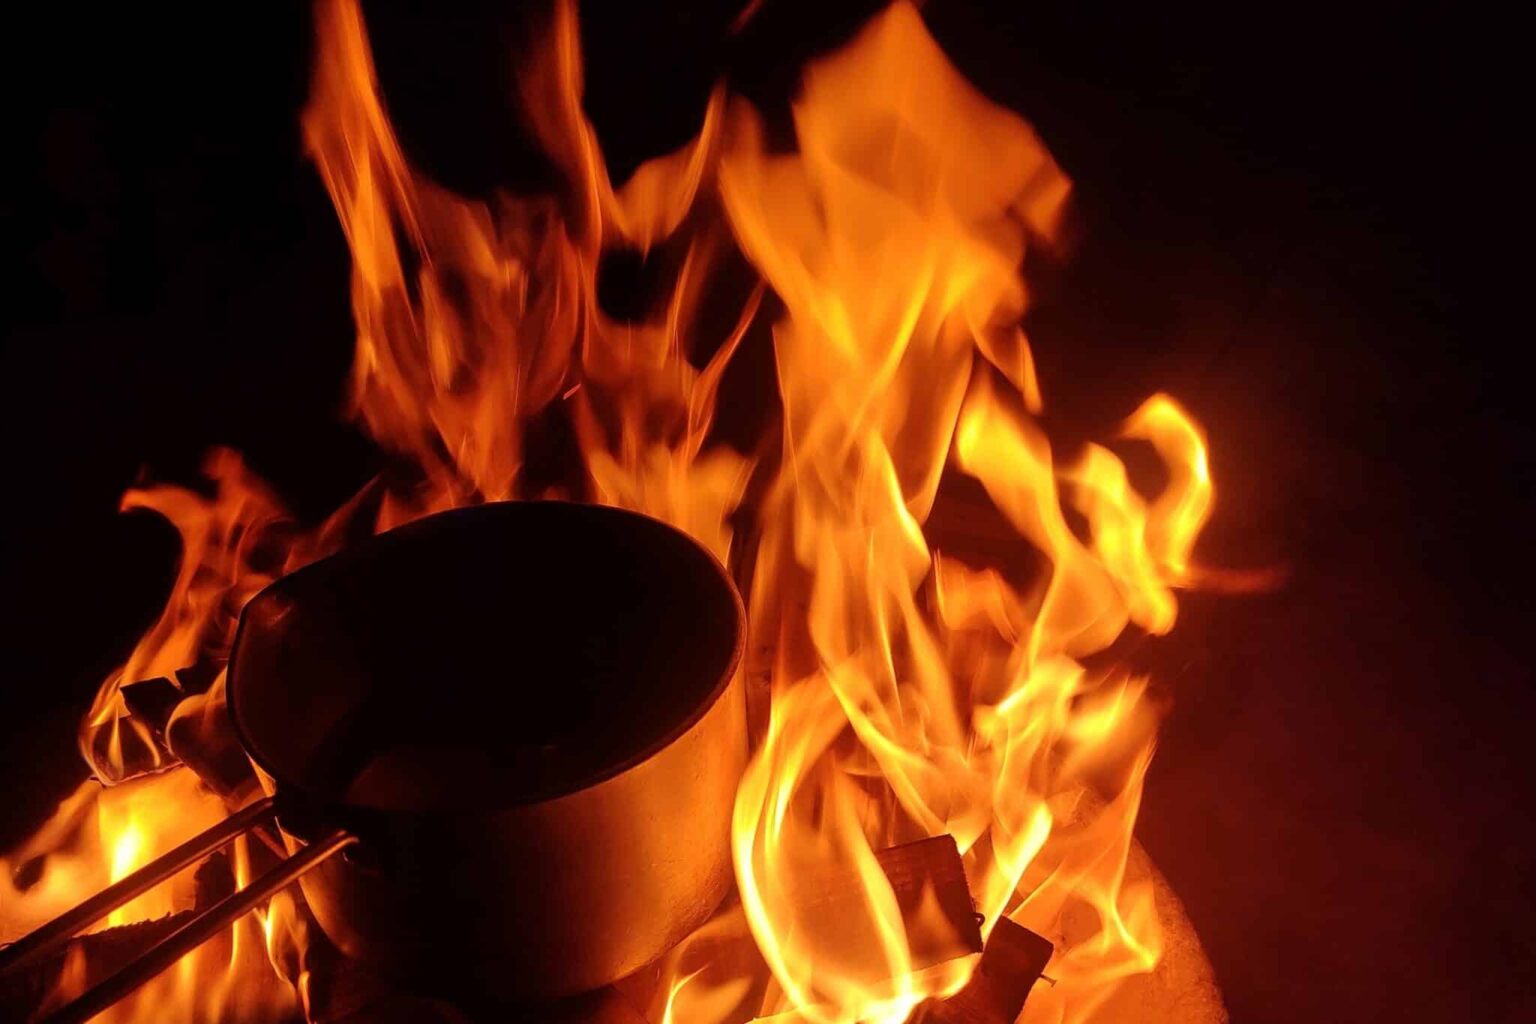 Metal cooking pot placed in a large, bright fire at nighttime